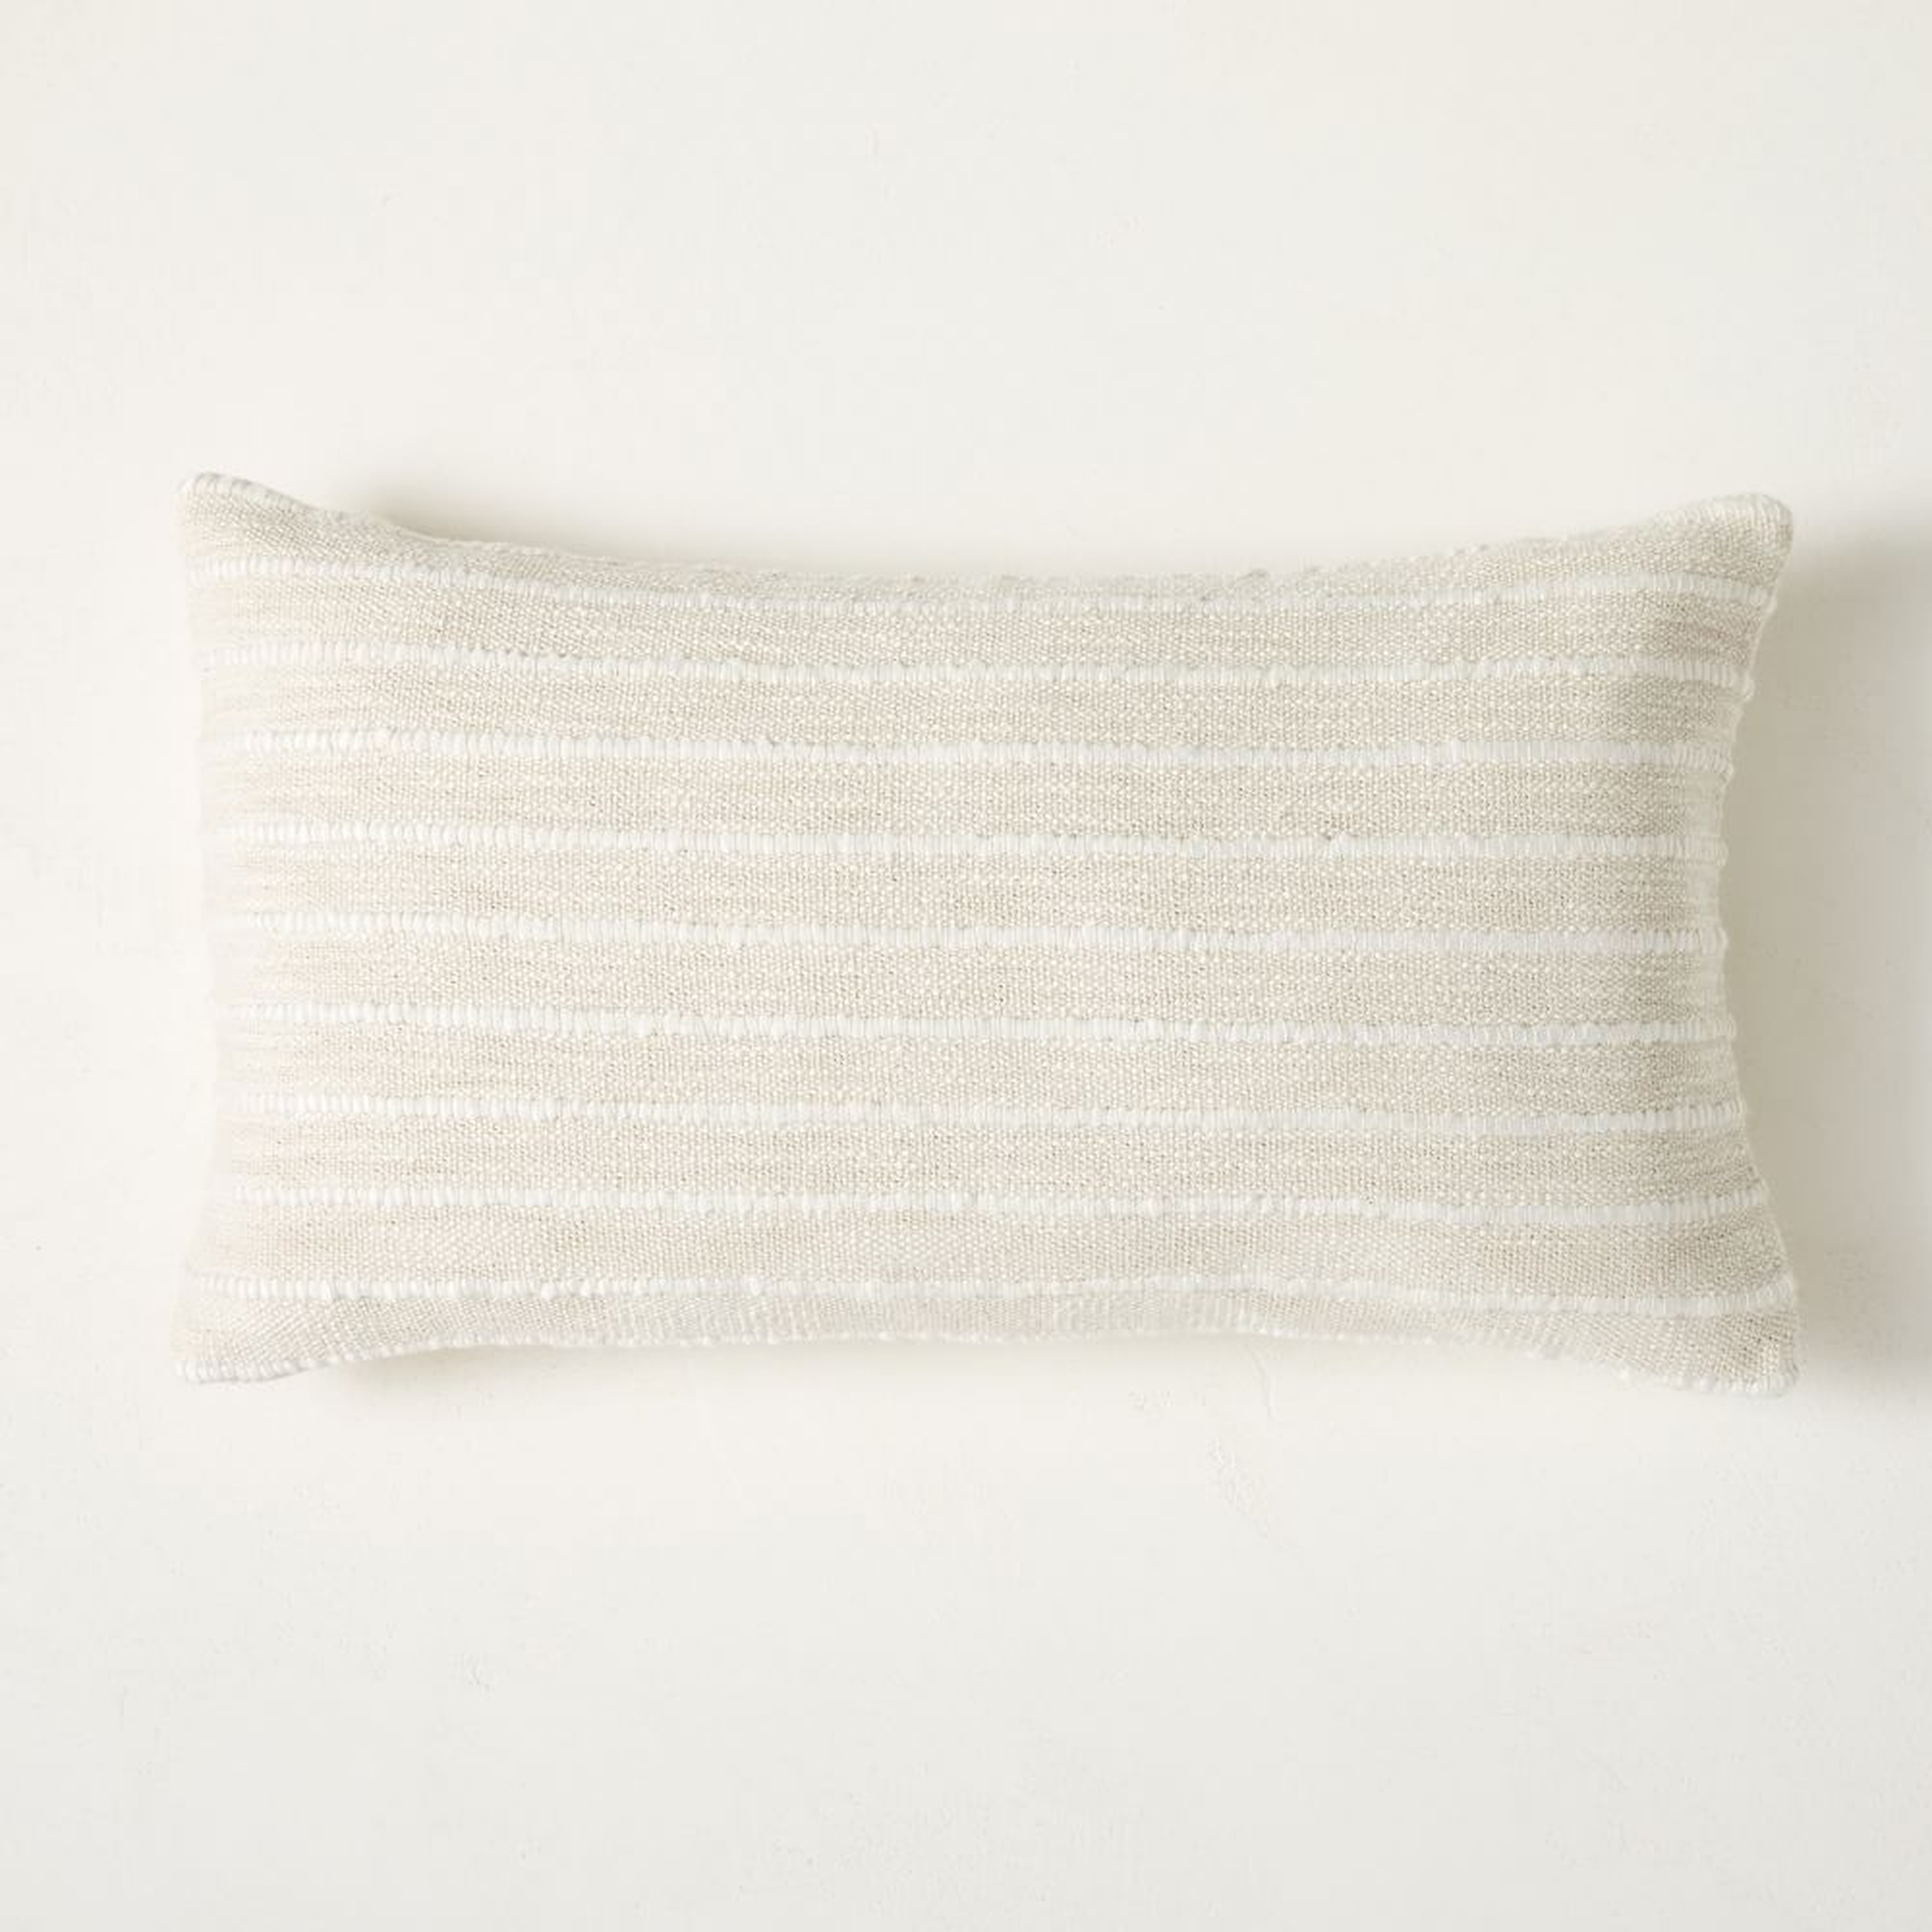 Soft Corded Pillow Cover, 14"x26", Natural Canvas - West Elm